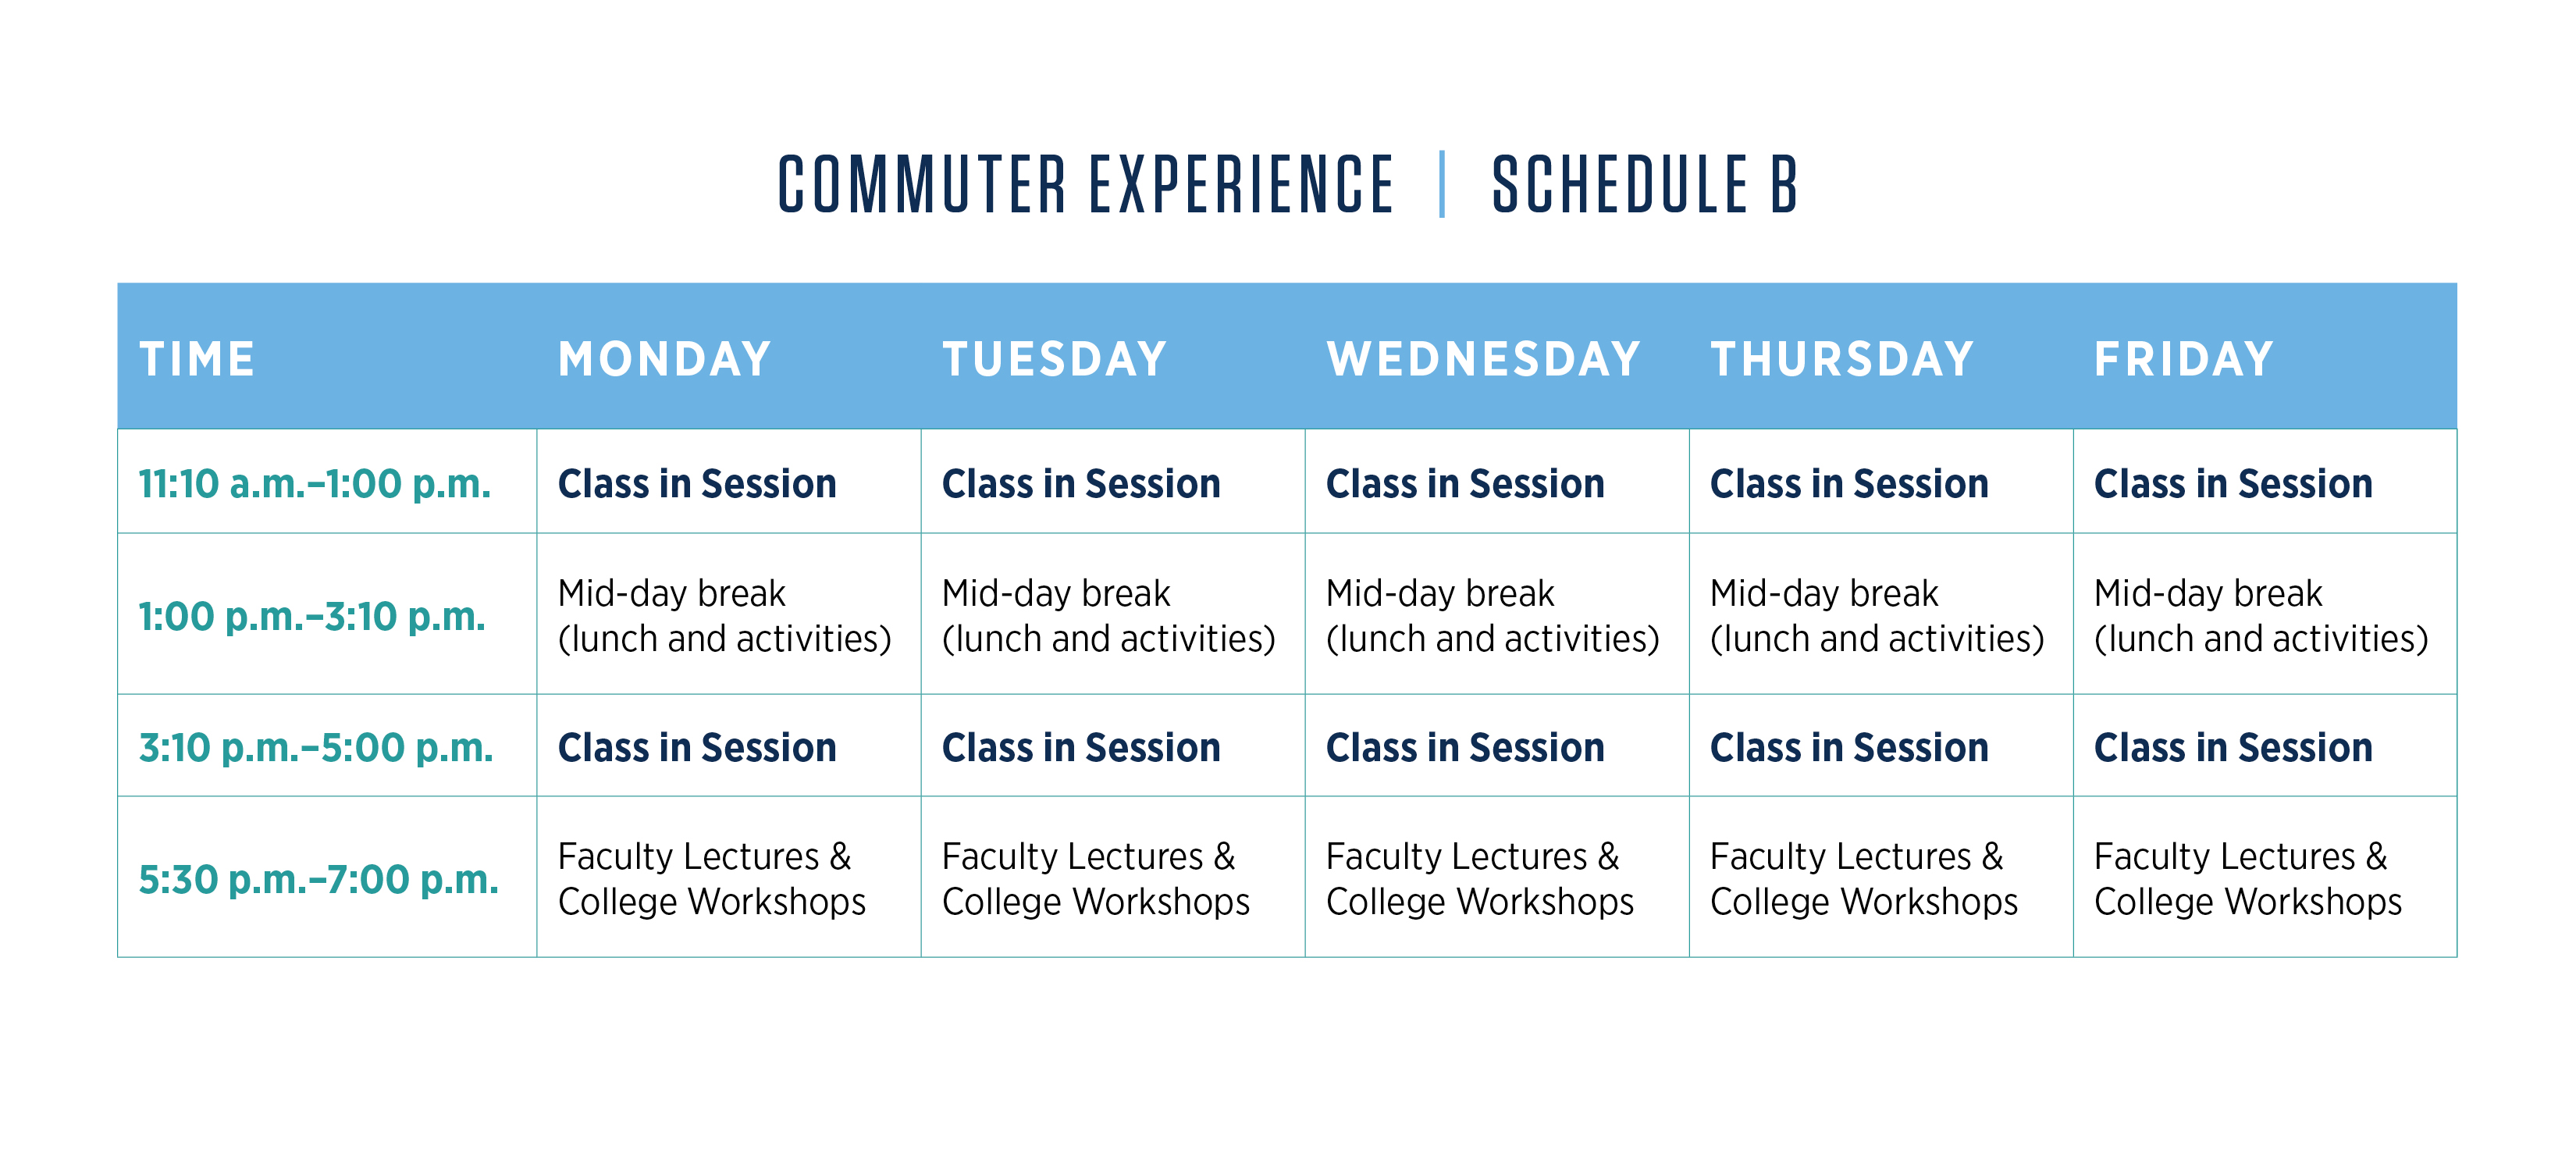 Enlargeable graphic showing Commuter Experiance Schedule B